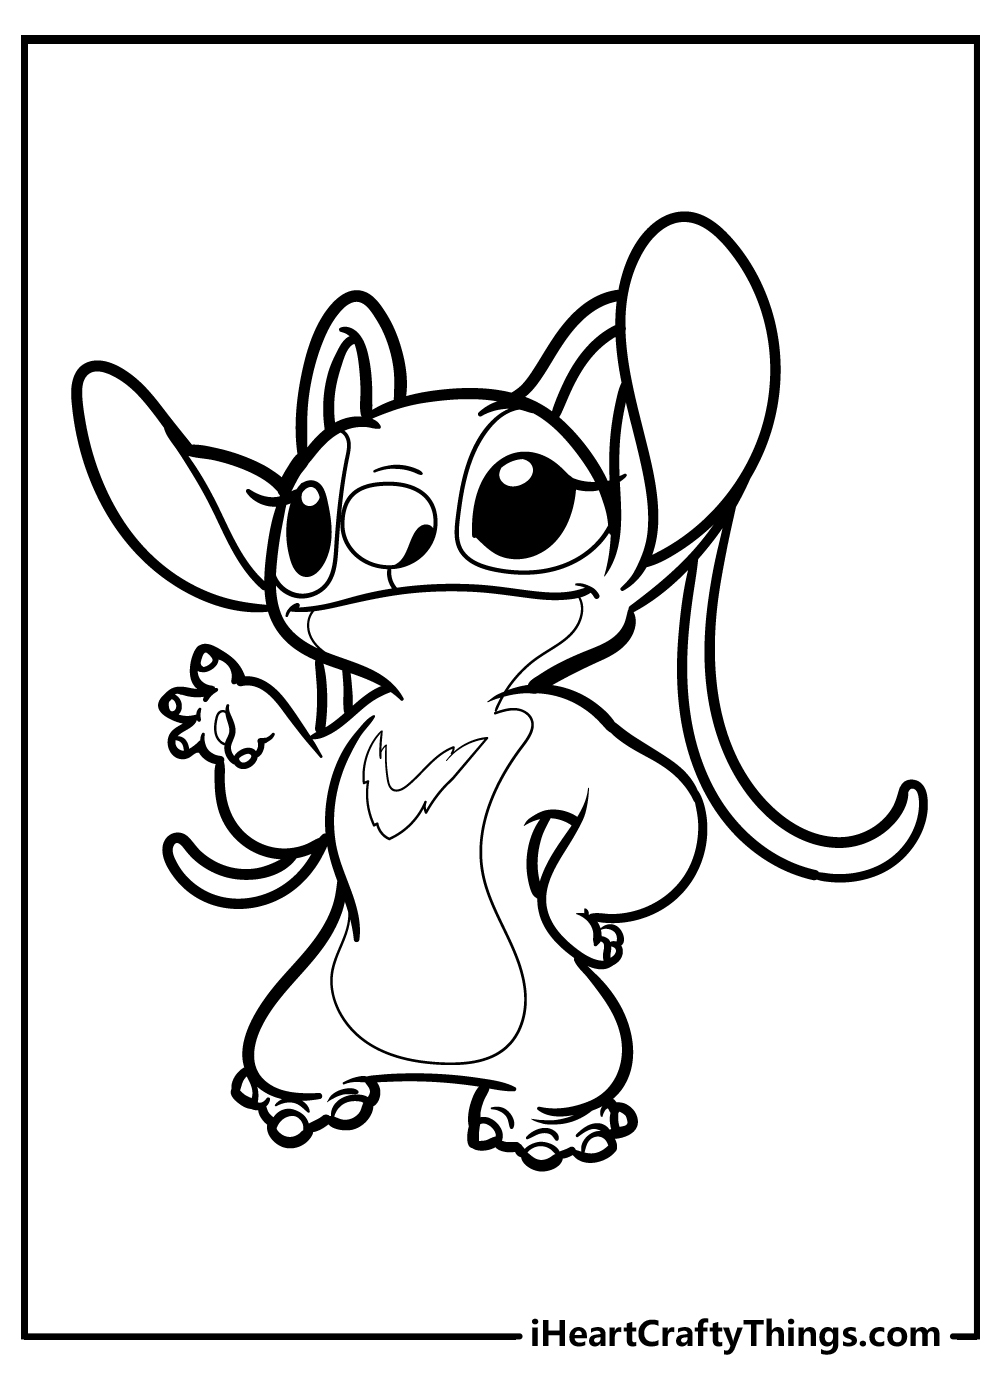 Stitch And Angel Coloring Pages   Coloring Home